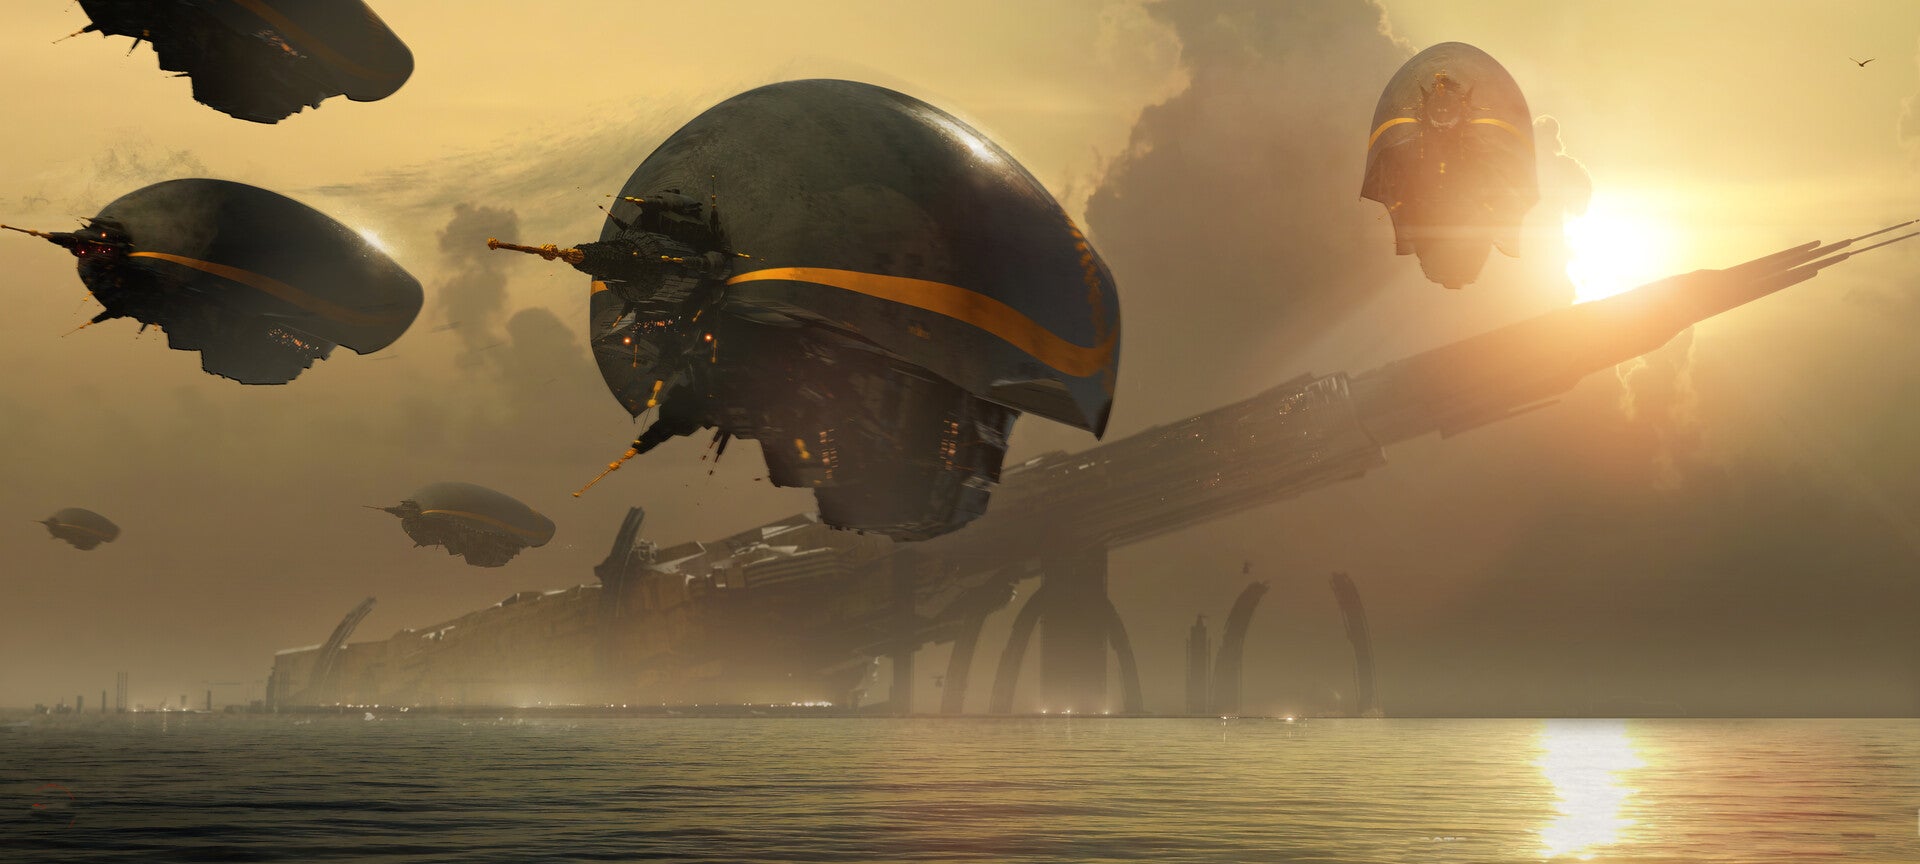 Concept Art From A Cancelled, Live-Action Robotech Movie